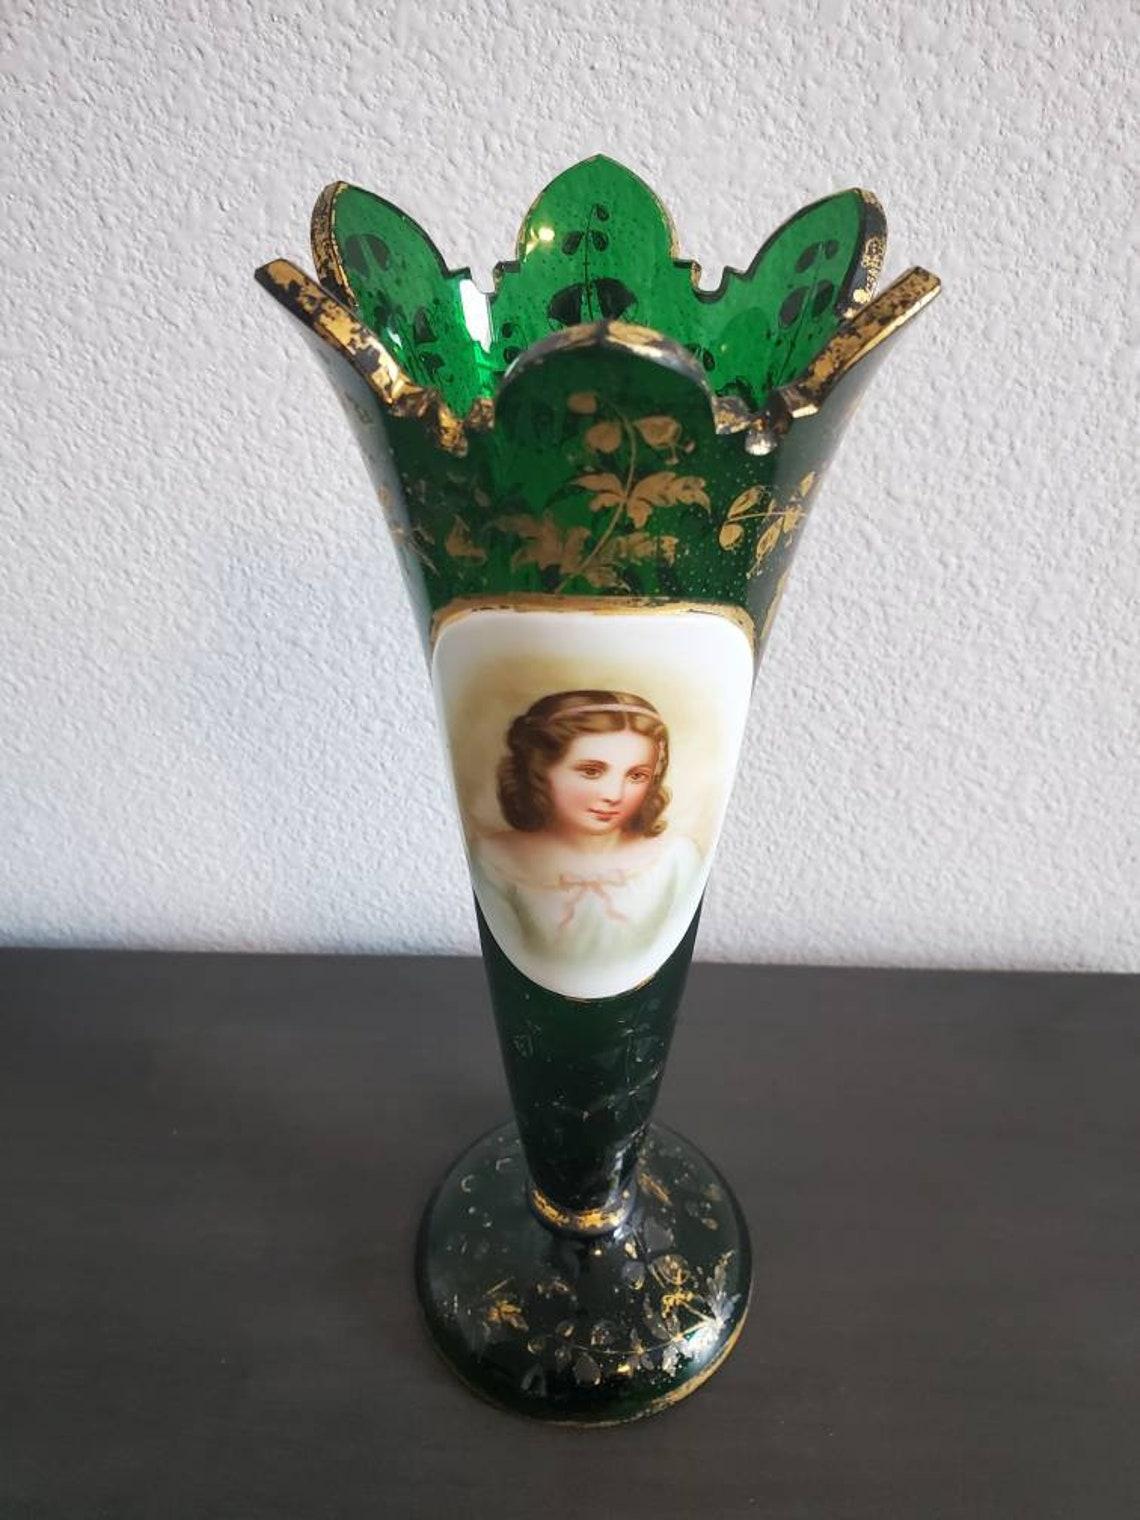 A very fine quality antique Bohemian parcel-gilt emerald green art glass vase attributed to luxury glassware icon, Moser Glassworks (1857-present)

Exquisitely hand blown and painted in Bohemia (present day Czech Republic) in the late 19th